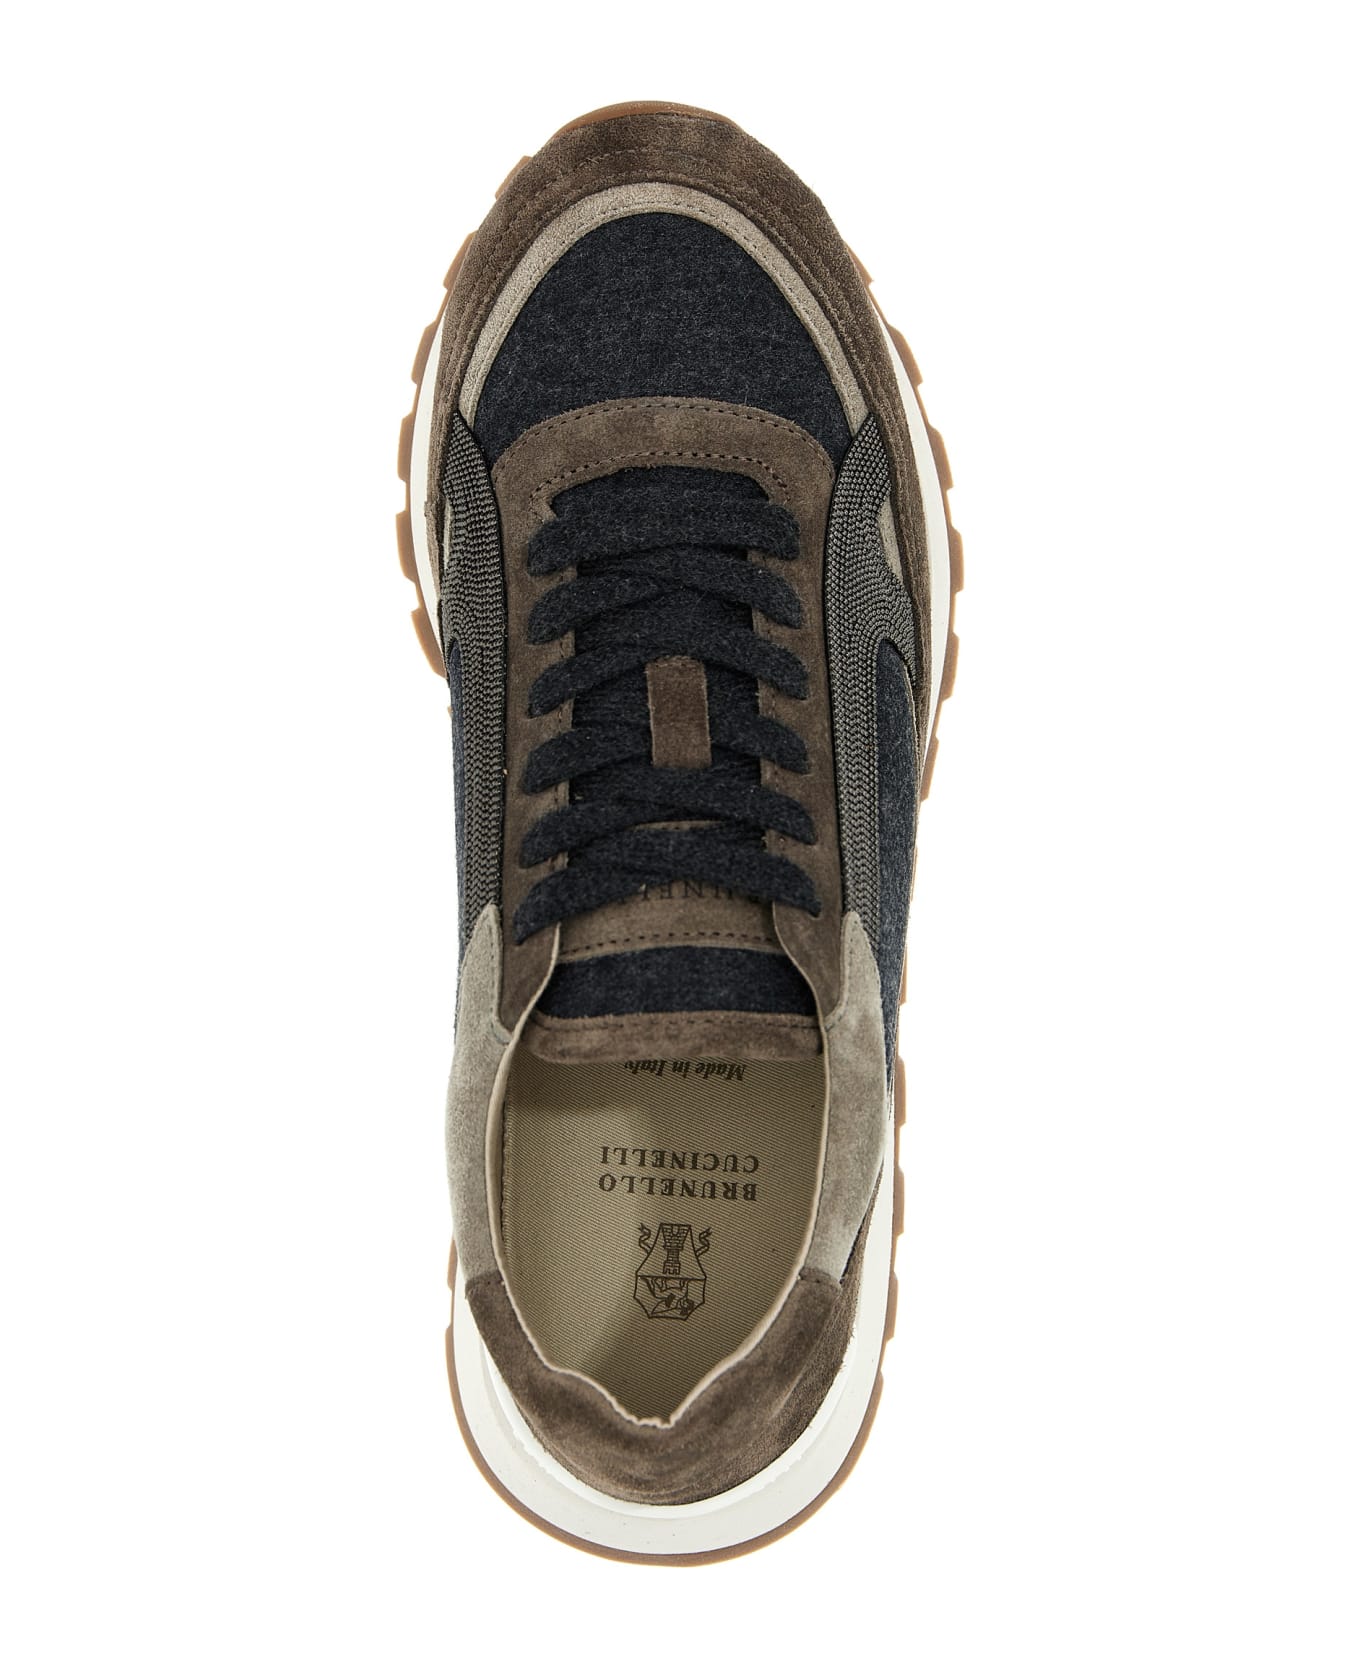 Brunello Cucinelli Suede Runner Sneaker Shoe With Wool Inserts Embellished With Brilliant Monili Detail On The Sides. Closure With Laces - Dark Grey